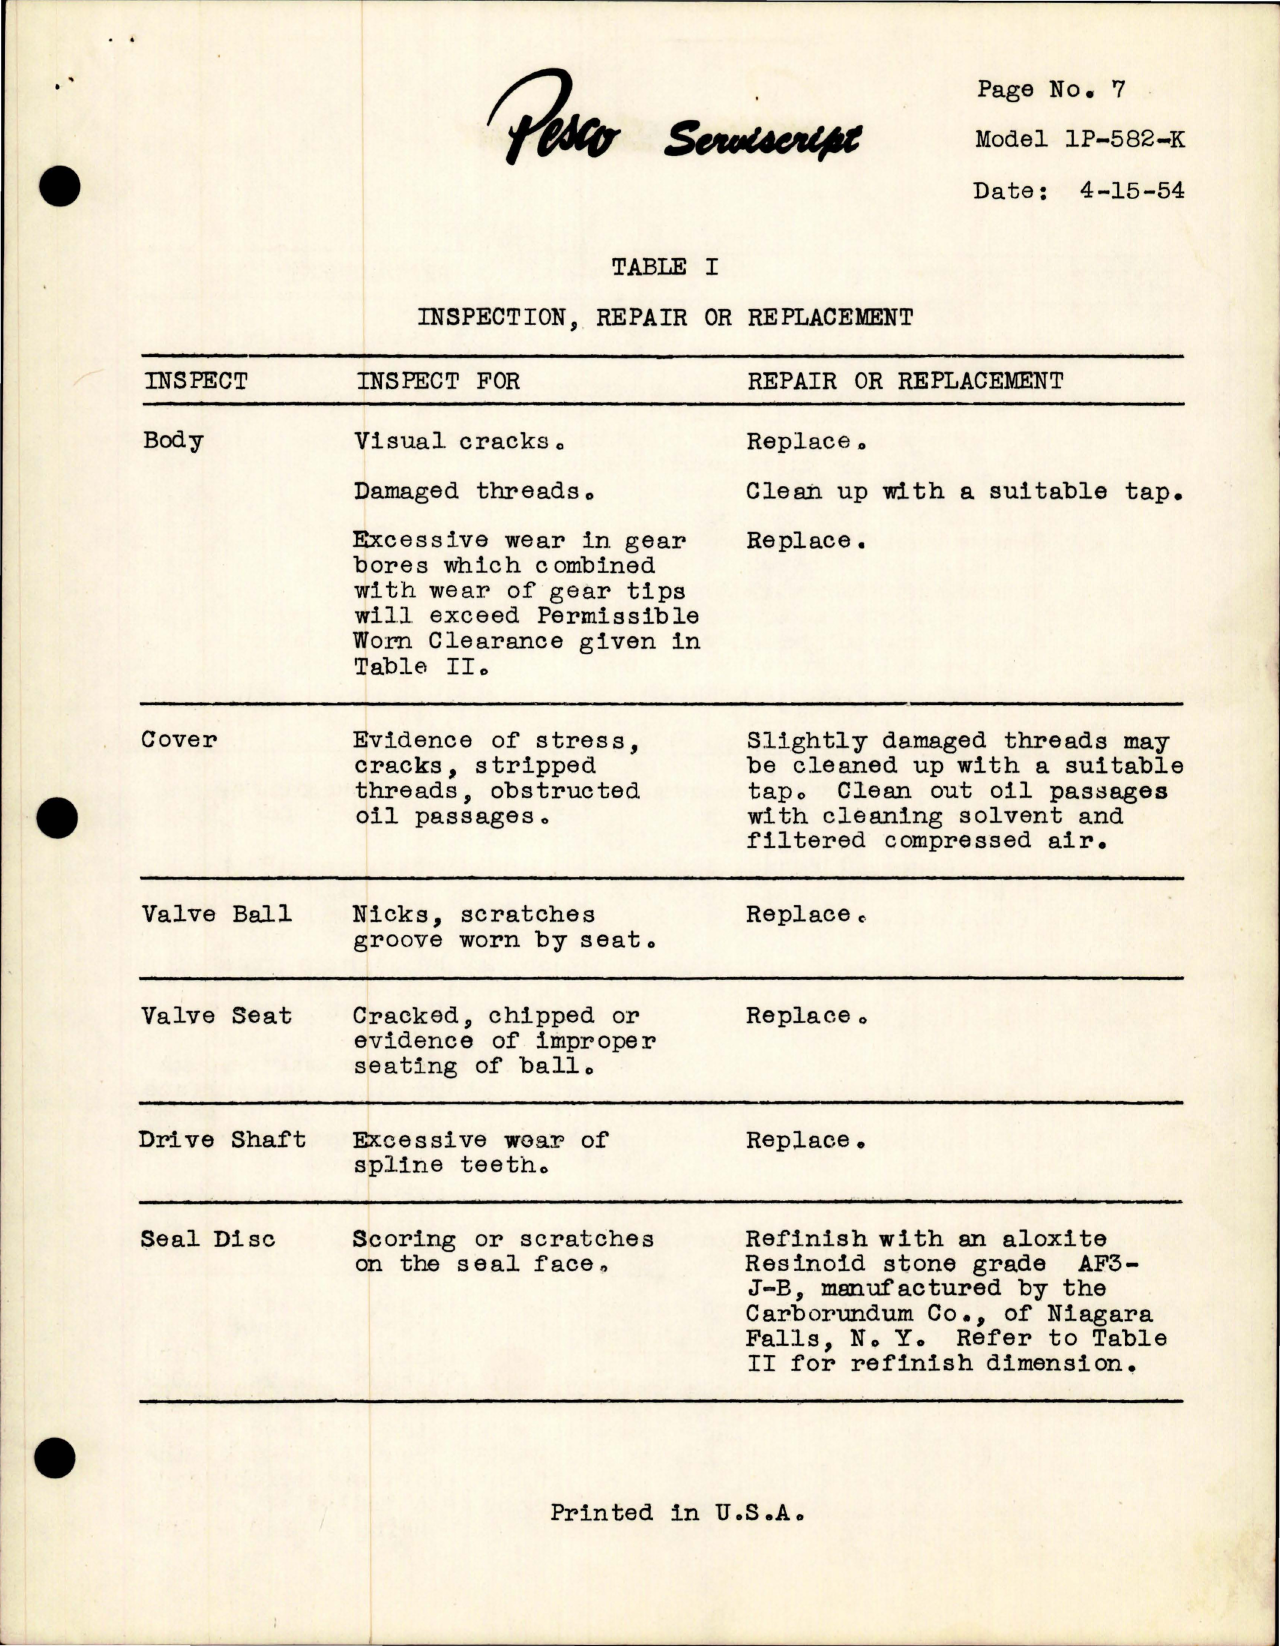 Sample page 7 from AirCorps Library document: Maintenance and Overhaul Instructions with Parts for Hydraulic Gear Pump - Model 1P-582-K